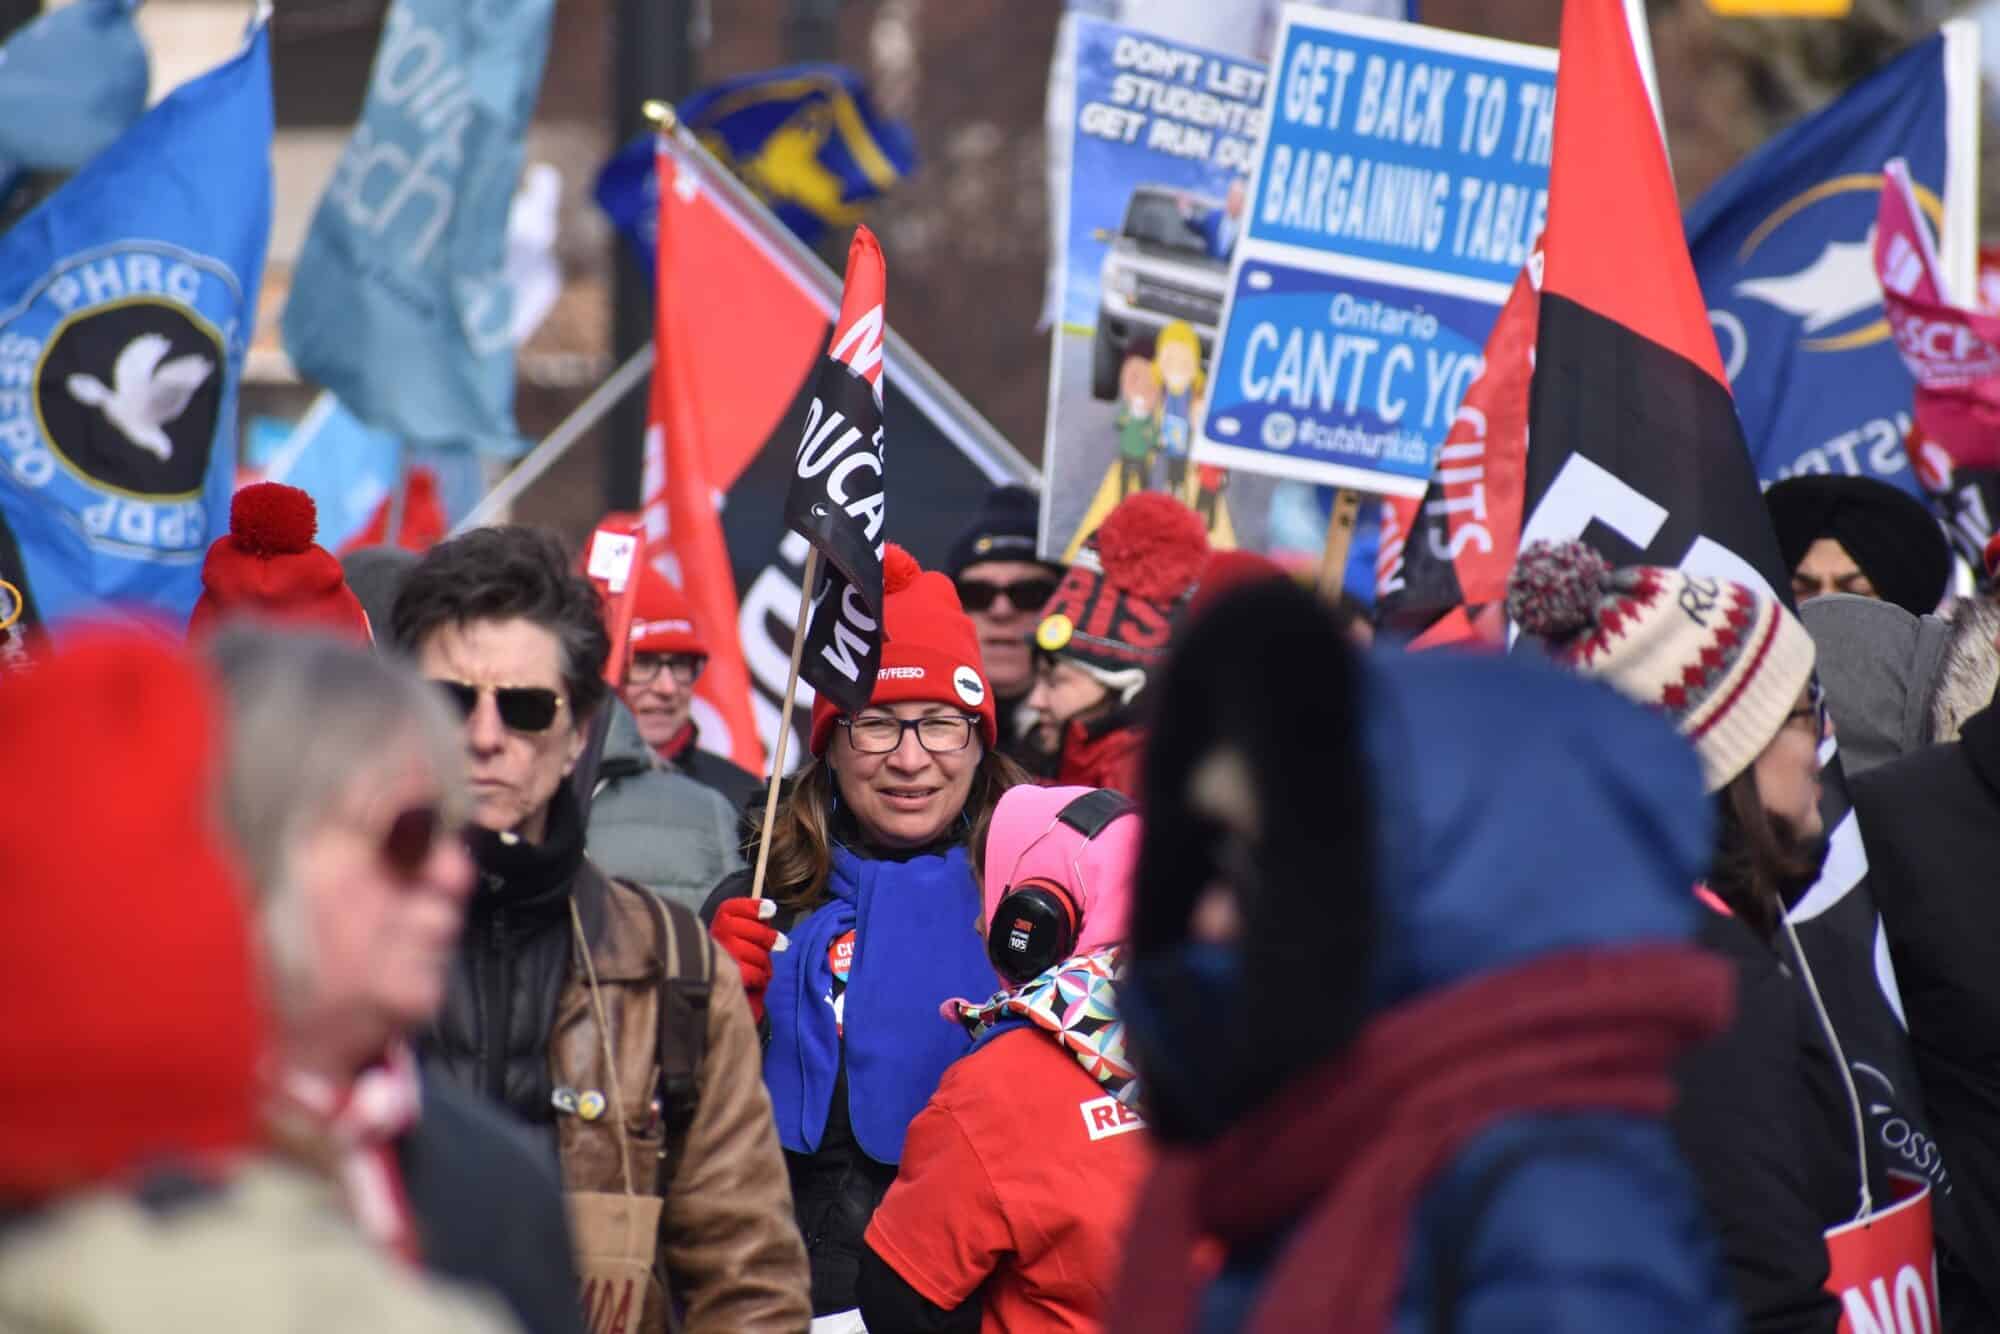 A march is held organized by Canadian labour unions.